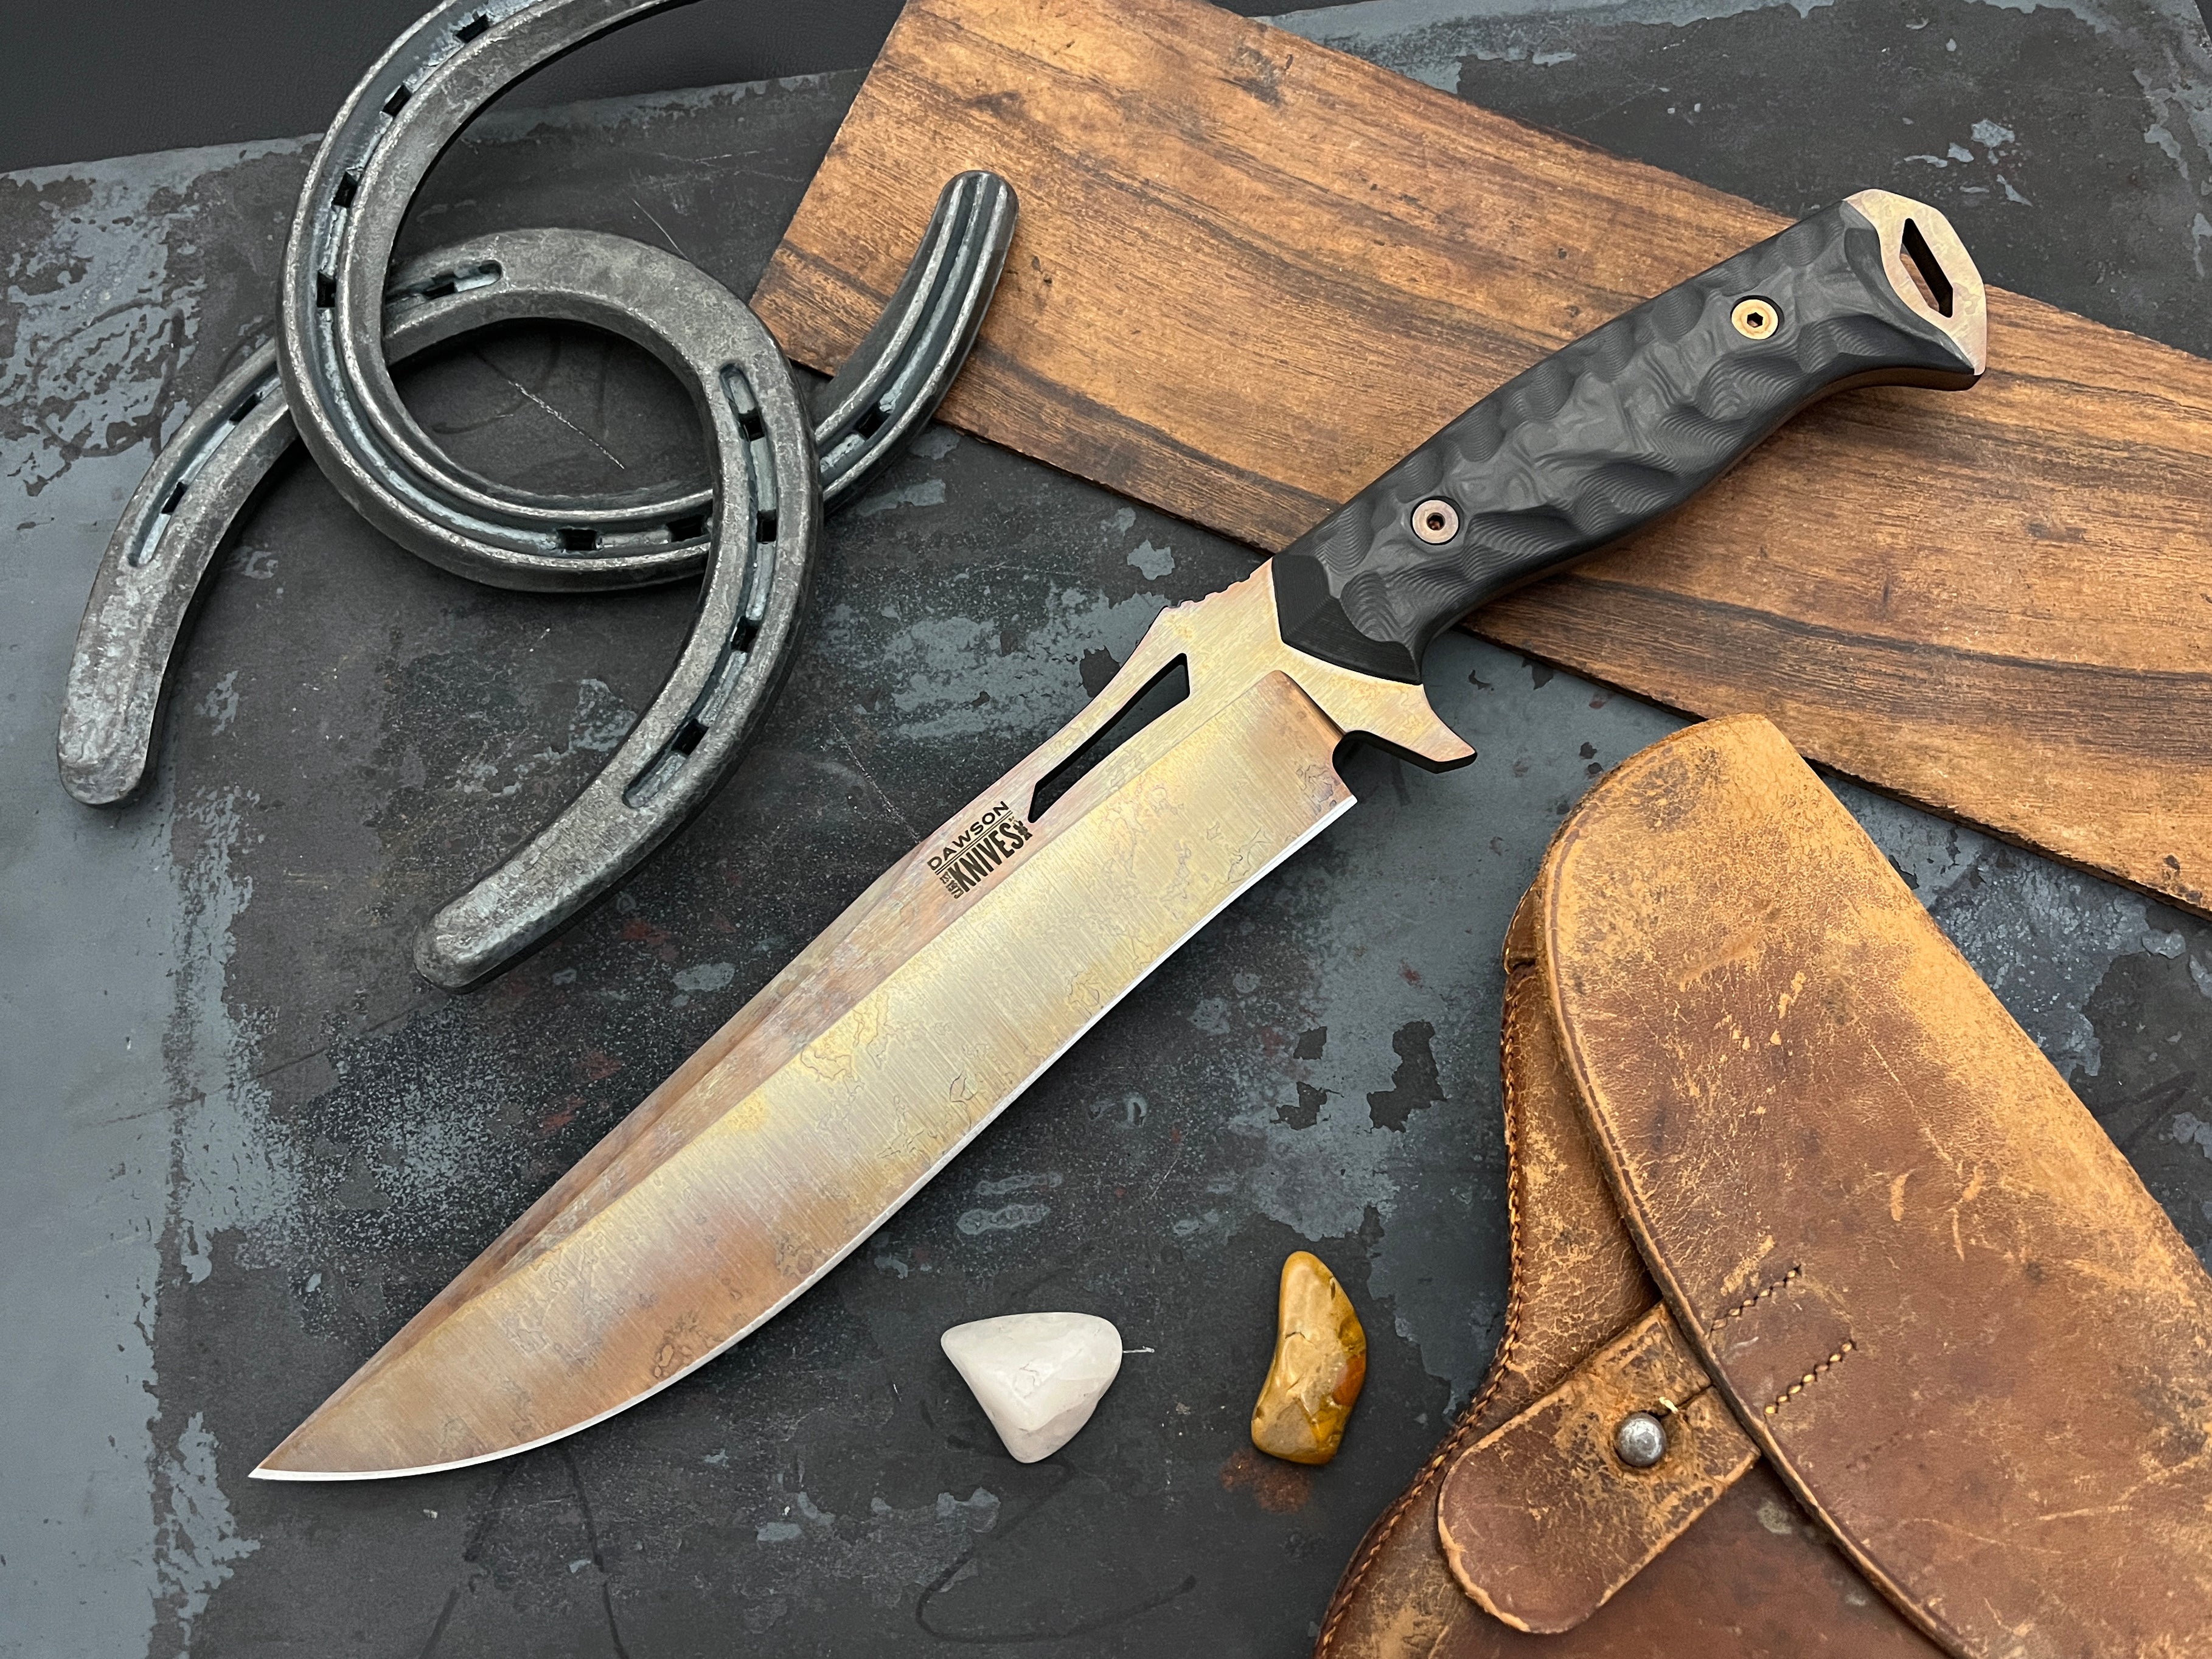 Seraphim CP | Crusher Pommel | NEW RELEASE | CPM MagnaCut Stainless Steel Bowie | Arizona Copper Finish